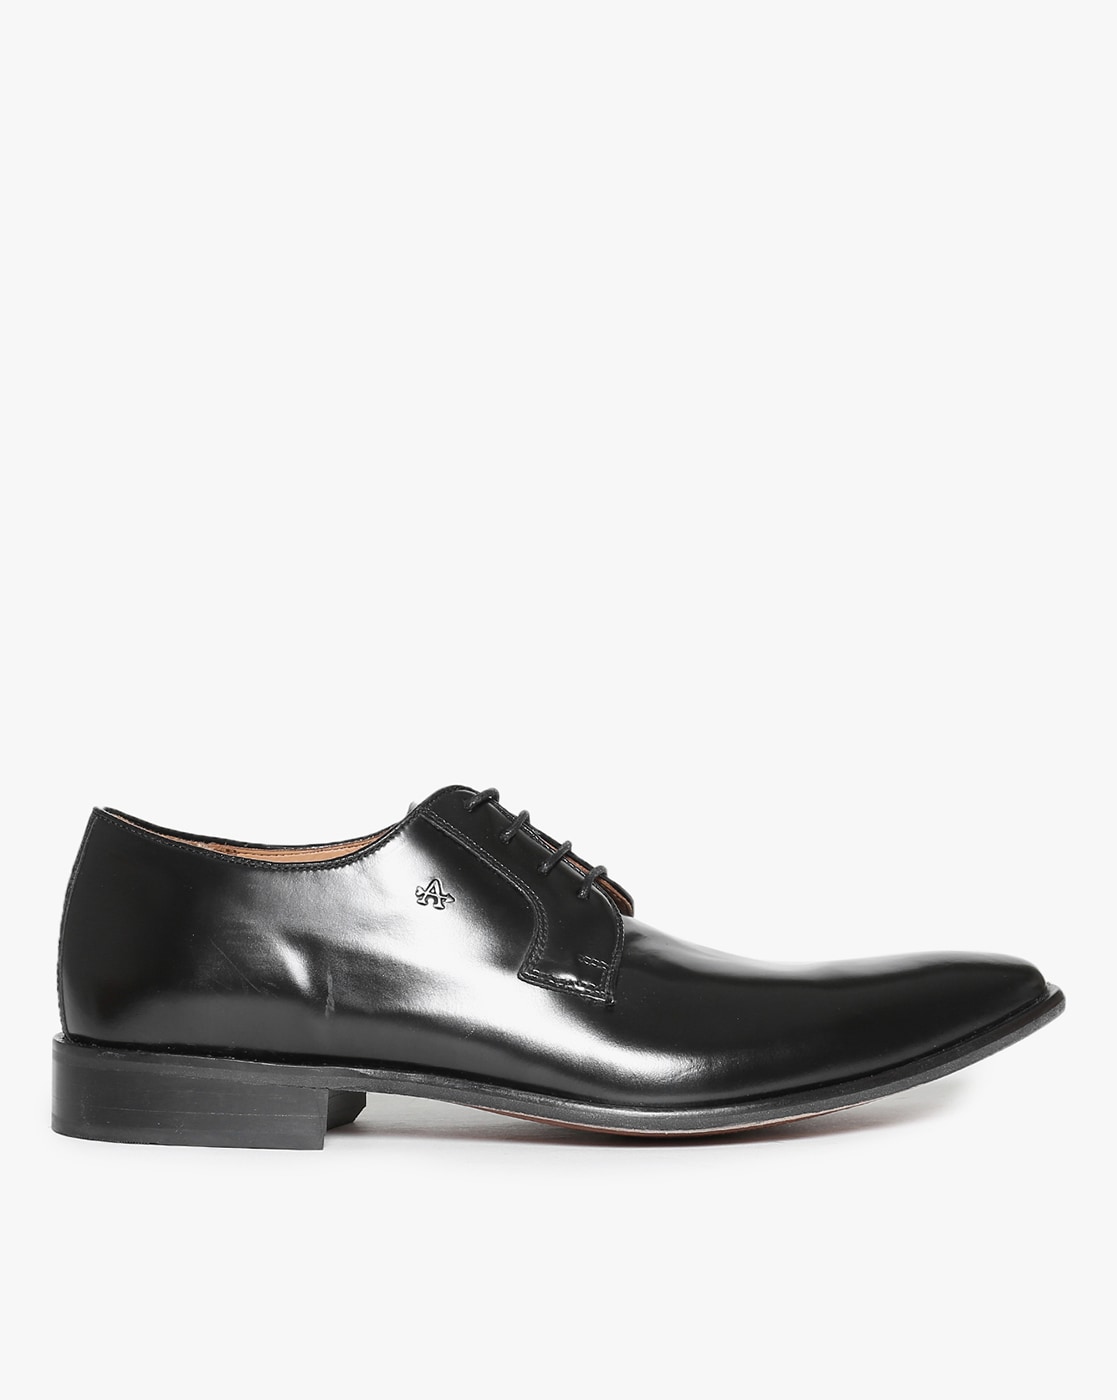 Buy Black Formal Shoes for Men by ARROW 